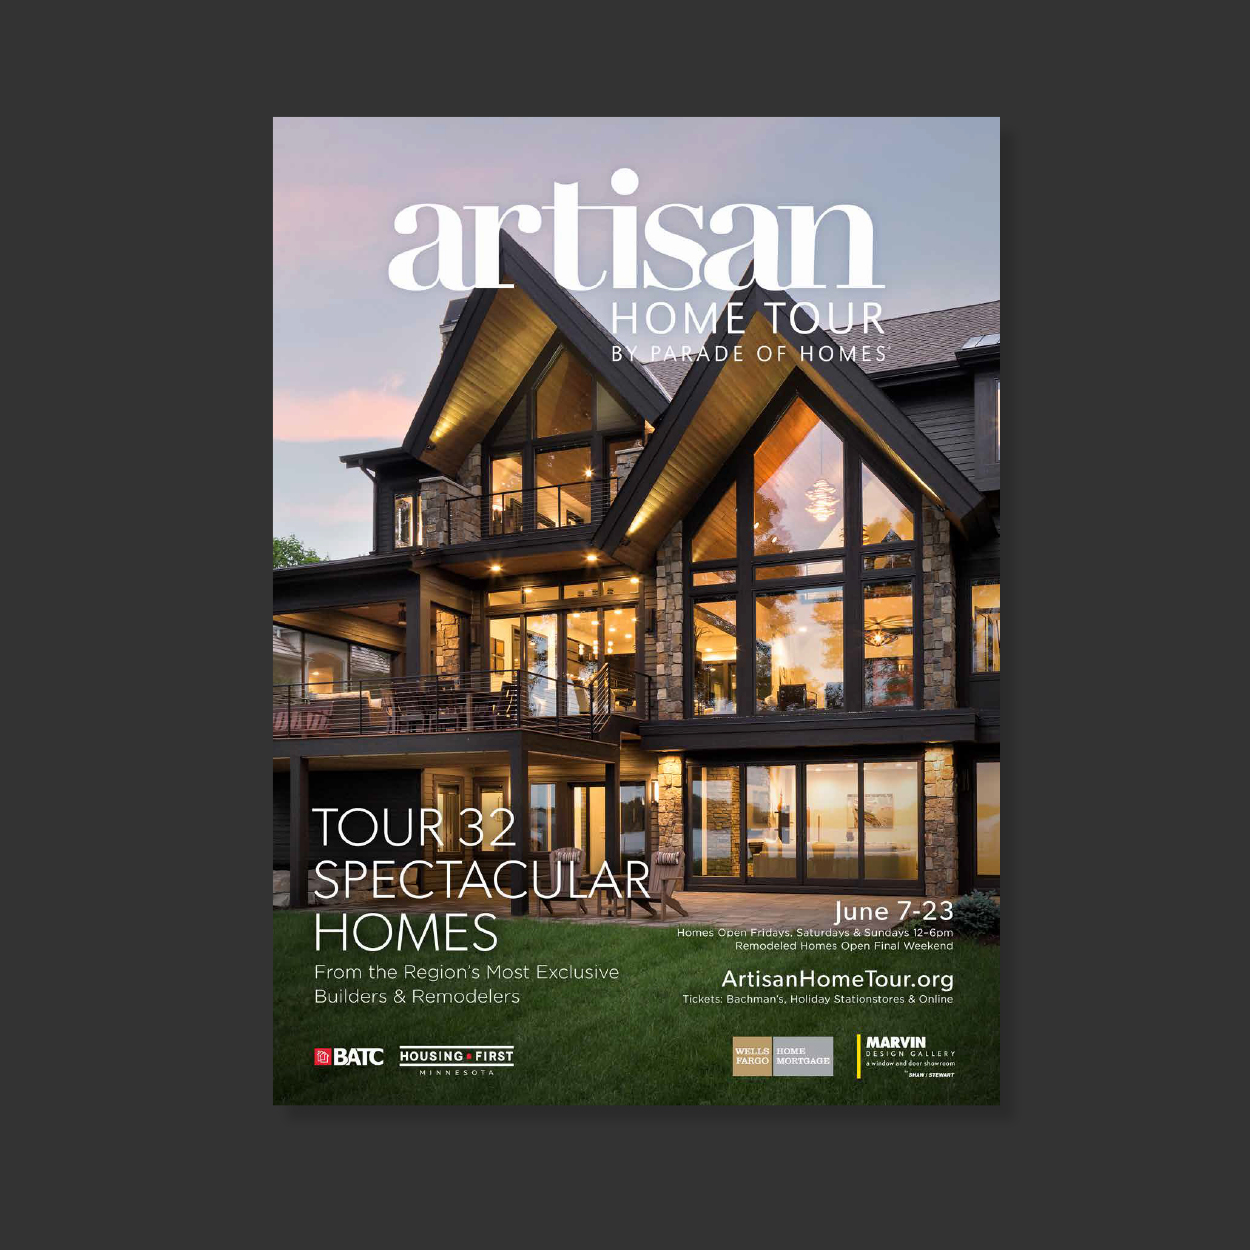 Image for Sixth Annual Artisan Home Tour by Parade of Homes Features 21 Spectacular New Homes and 11 Remodeled Homes